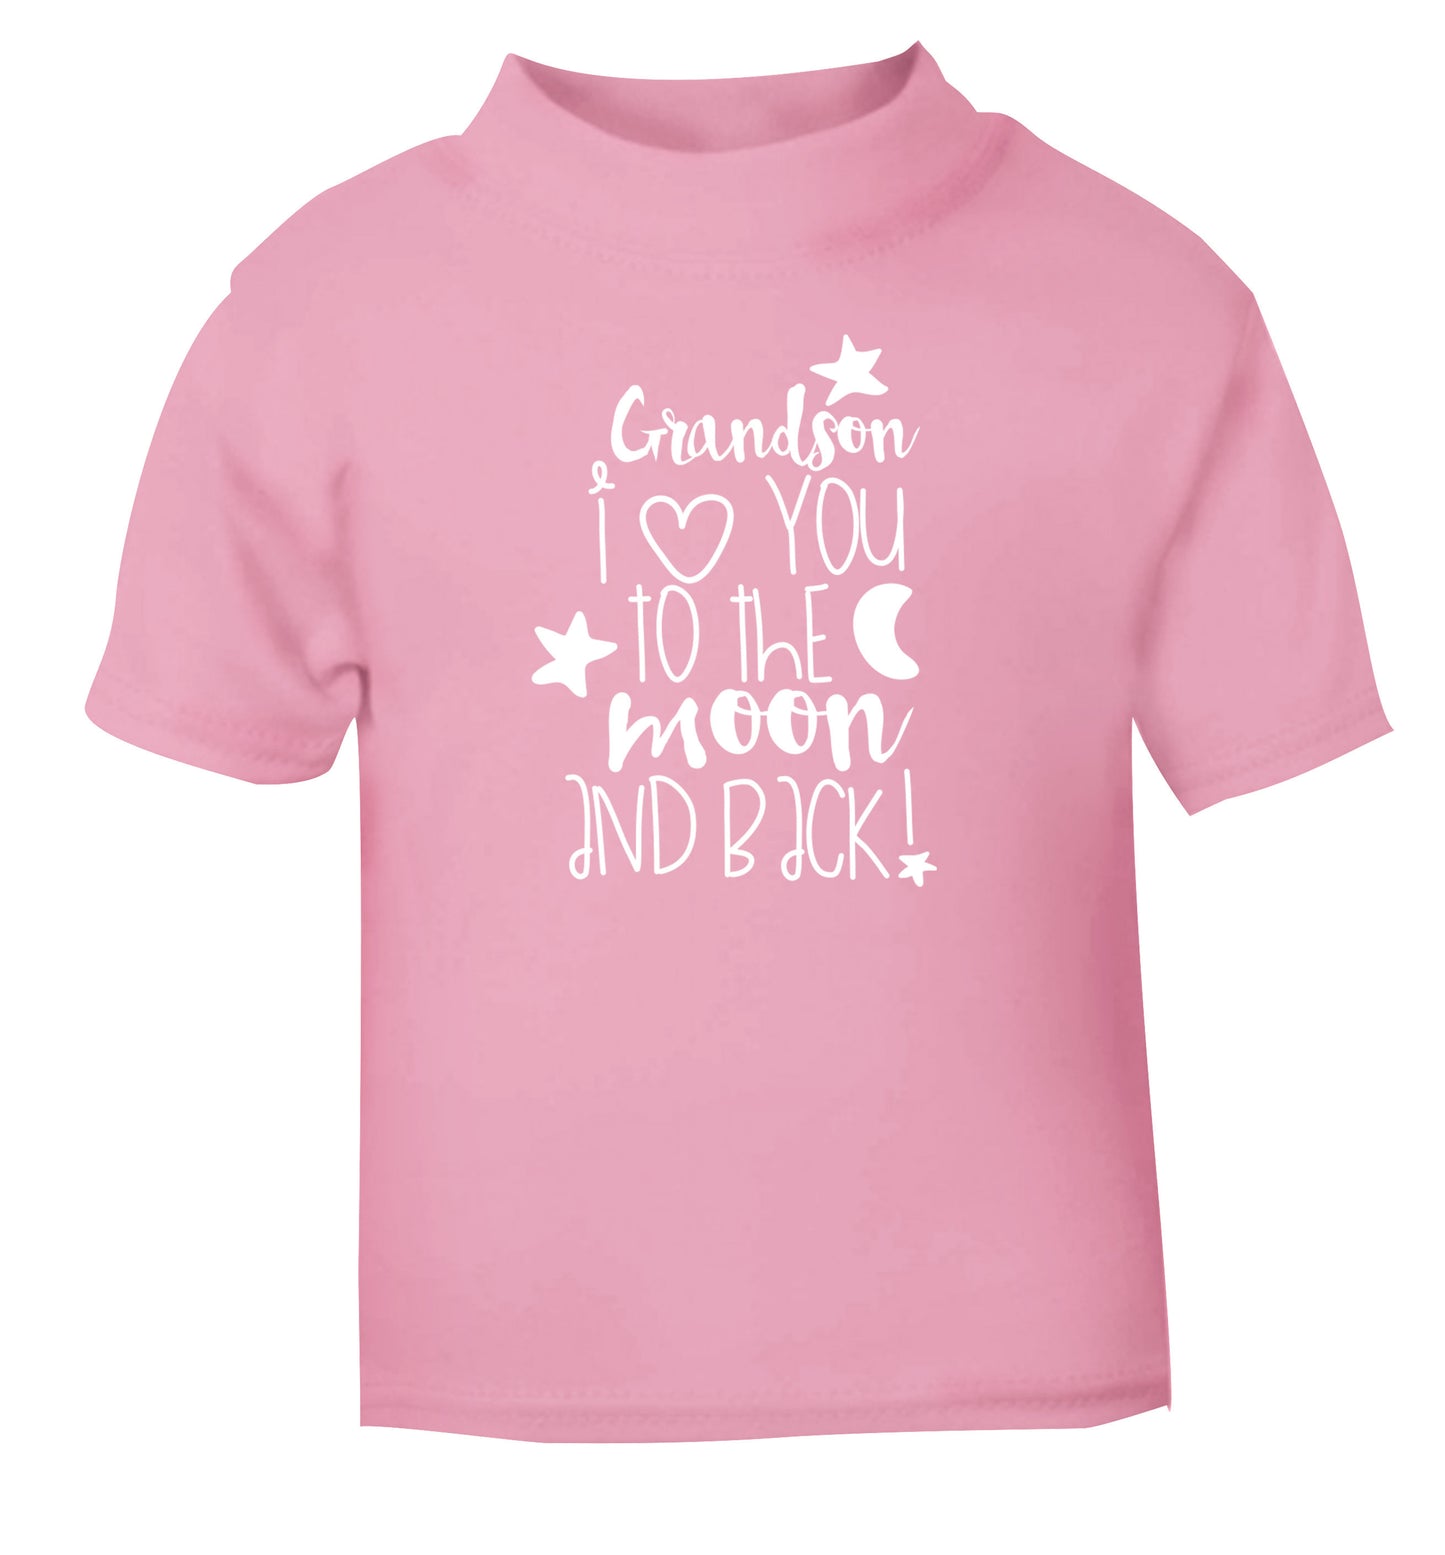 Grandson I love you to the moon and back light pink Baby Toddler Tshirt 2 Years